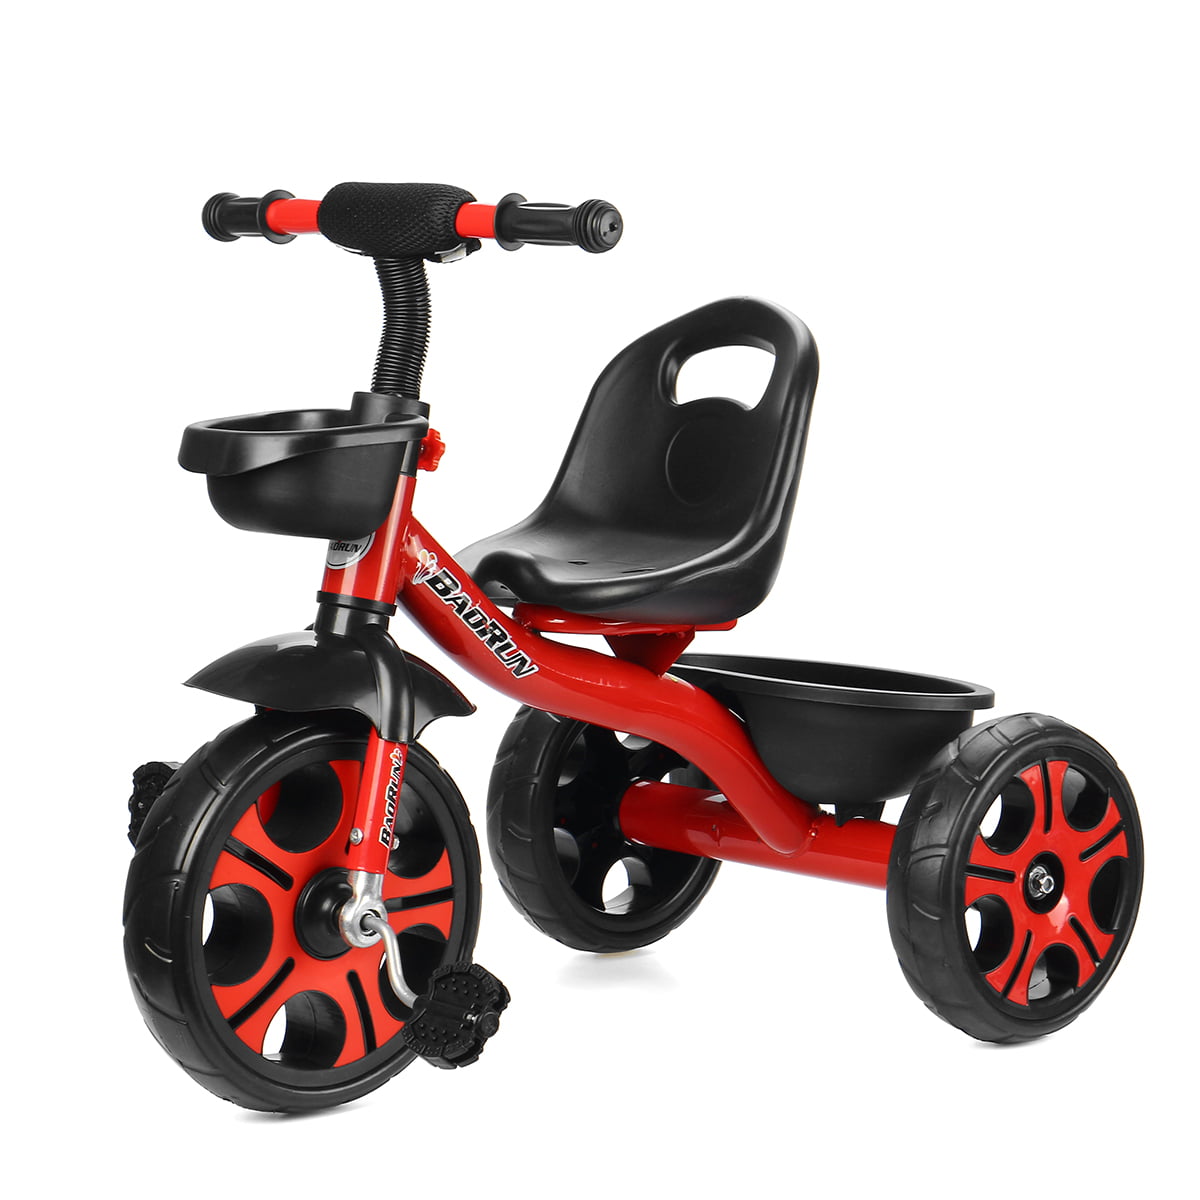 Foldable Children 3 Wheel Pedal Bike RRH Tricycle Kids Tricycle 50kg Capacity for 2-6 Years Kids and Toddlers 85-120 cm,Orange 